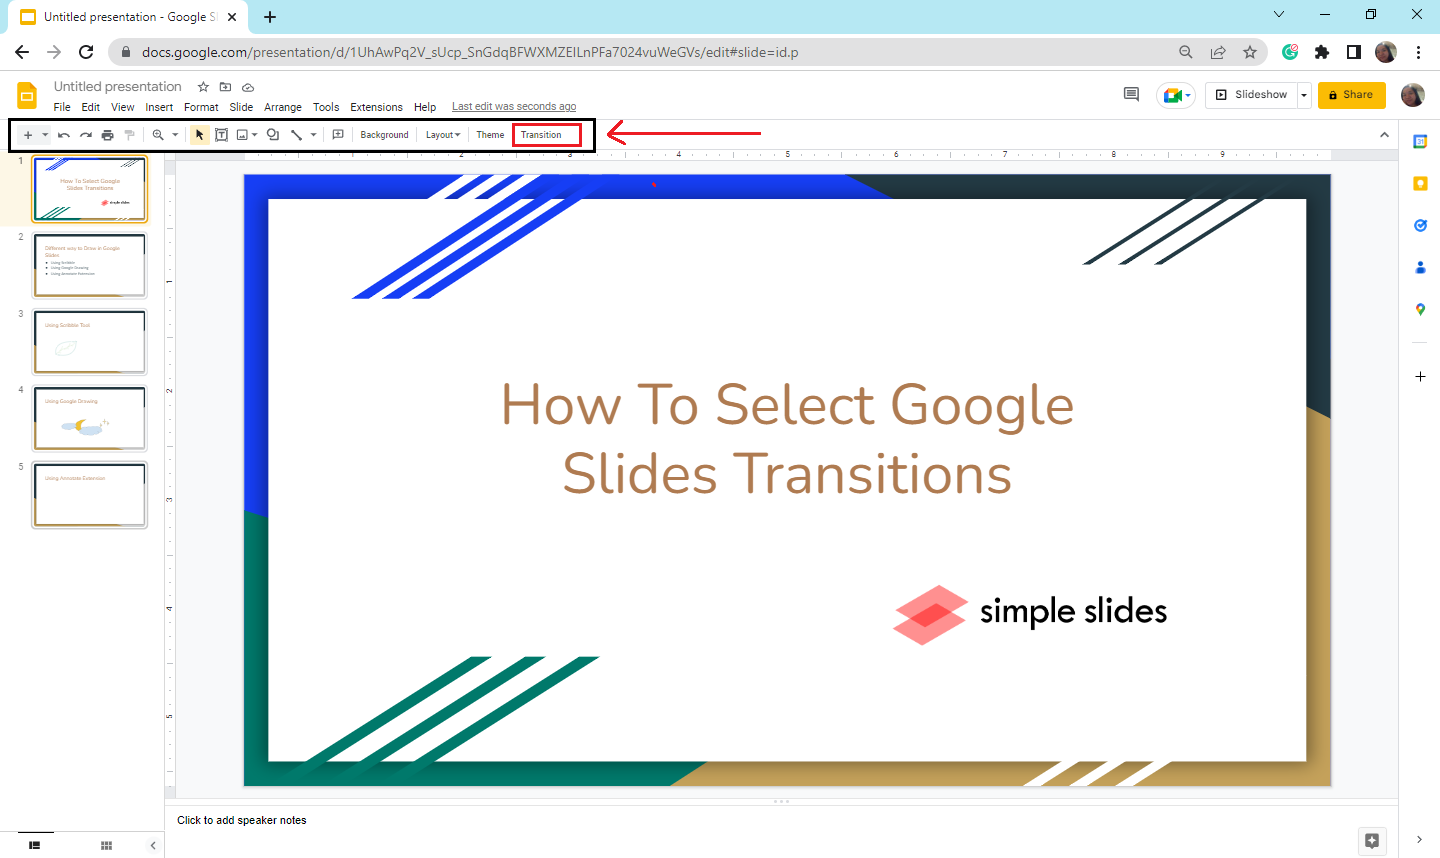 Navigate and select "transition" in the toolbar section.